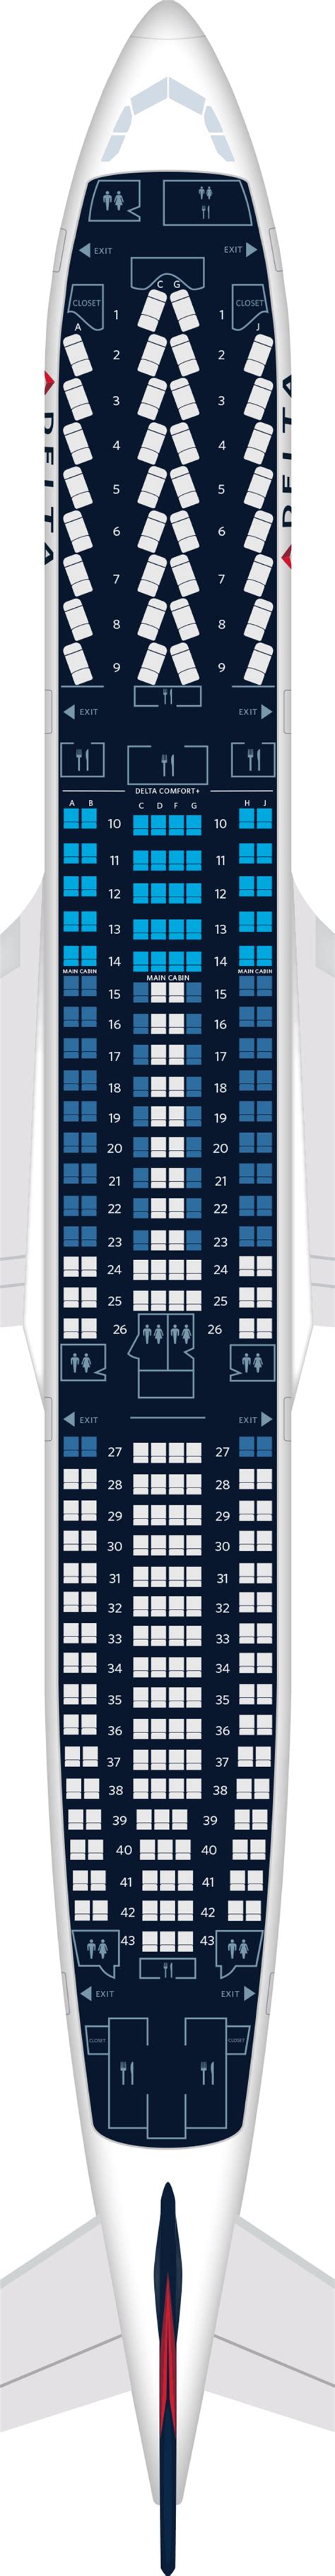 Delta Airbus Industrie A333 Jet Seating Chart Elcho Table